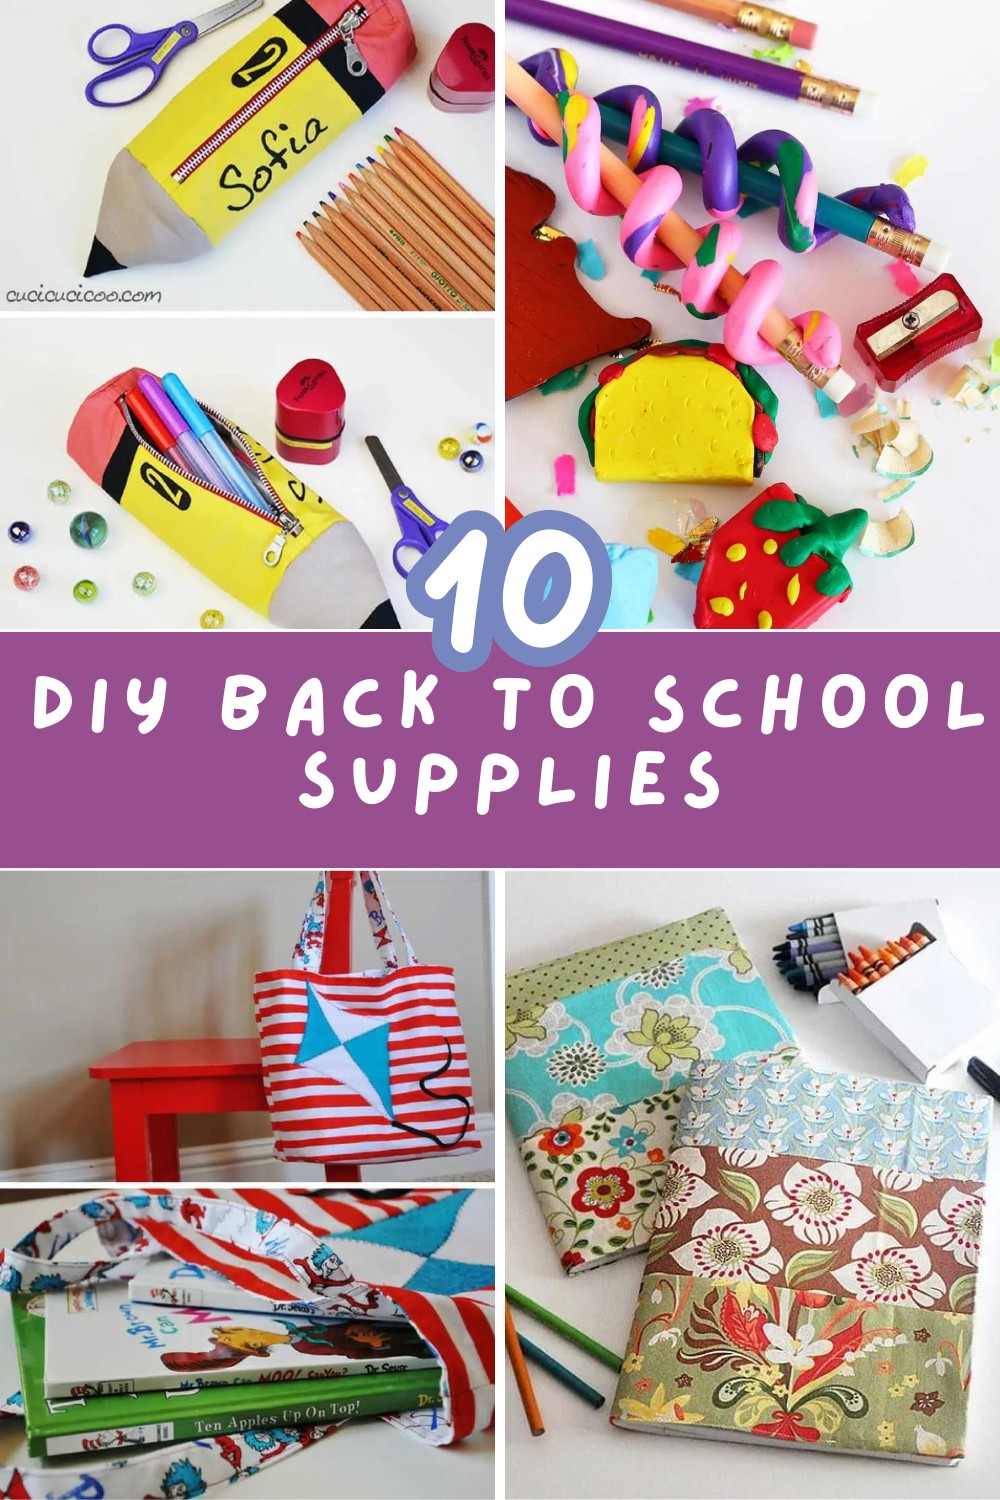 Make school supplies fun with these 23 creative DIY projects! Your kids will love crafting their own unique notebooks, pencils, and erasers. It's a great way to personalize their school gear and get them excited for the new school year! #DIYKids #SchoolCrafts #BackToSchoolFun